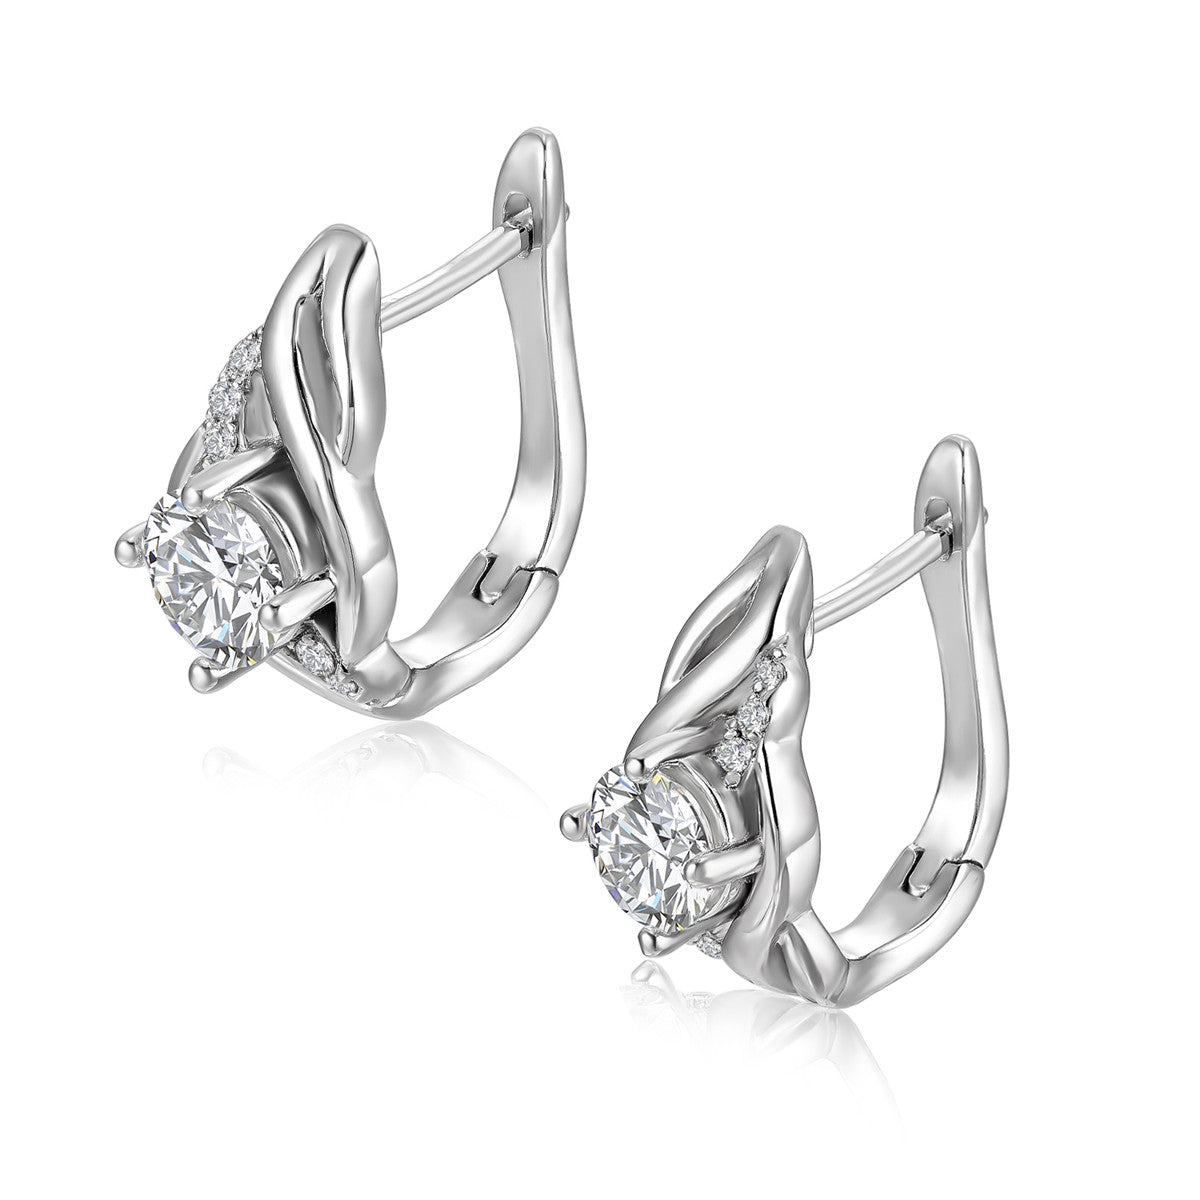 Moissanite by Cate & Chloe Evelyn Sterling Silver Drop Earrings with Moissanite Crystals